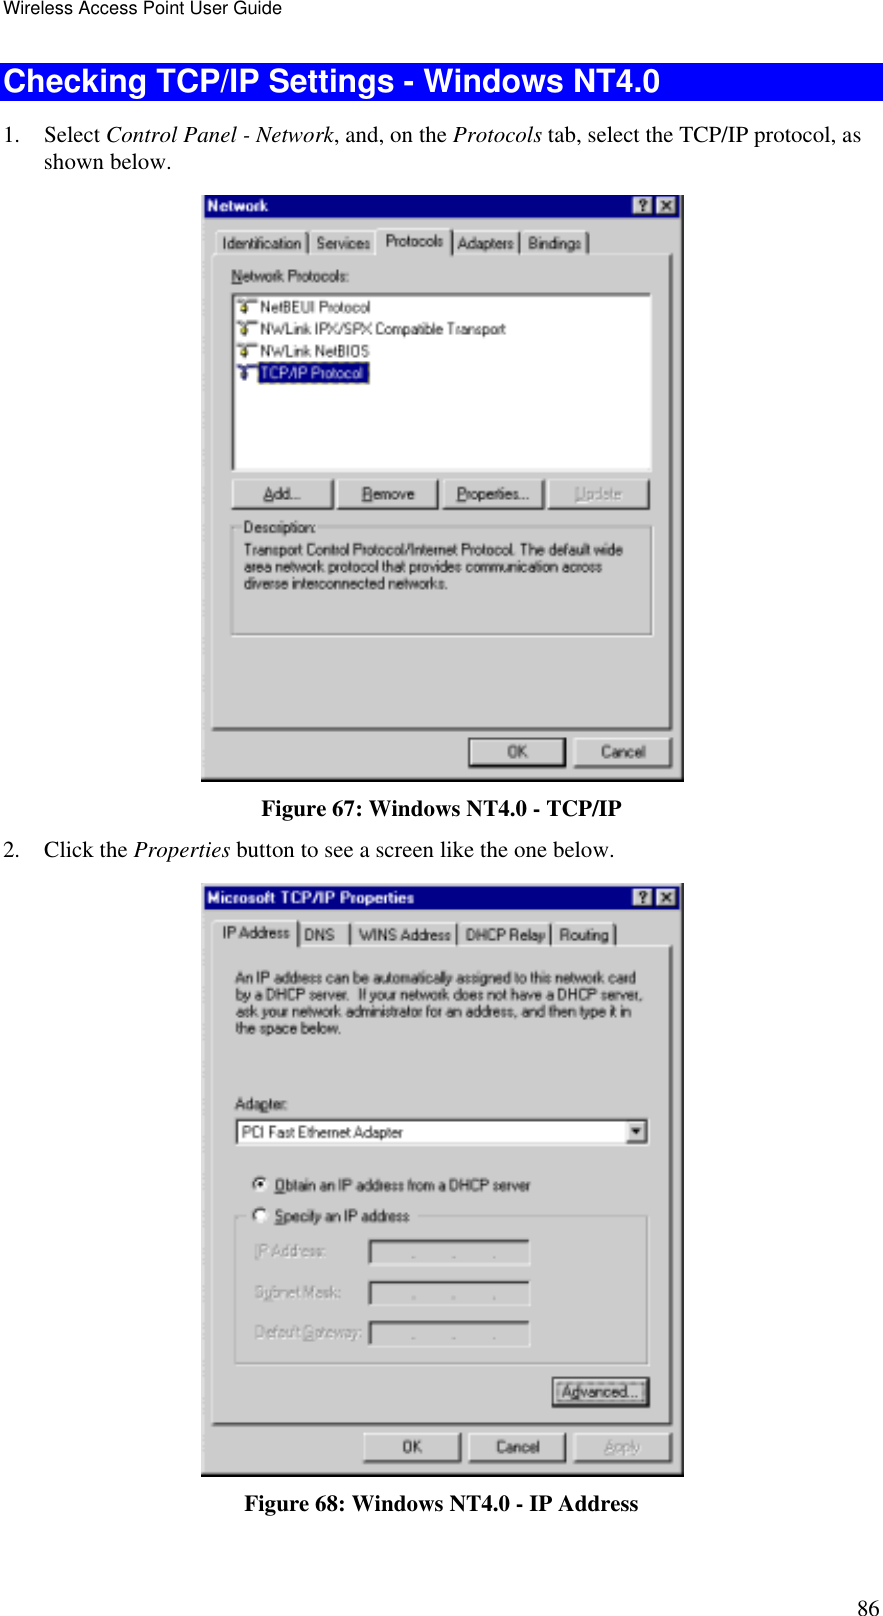 Wireless Access Point User Guide 86 Checking TCP/IP Settings - Windows NT4.0 1. Select Control Panel - Network, and, on the Protocols tab, select the TCP/IP protocol, as shown below.  Figure 67: Windows NT4.0 - TCP/IP 2. Click the Properties button to see a screen like the one below.  Figure 68: Windows NT4.0 - IP Address 